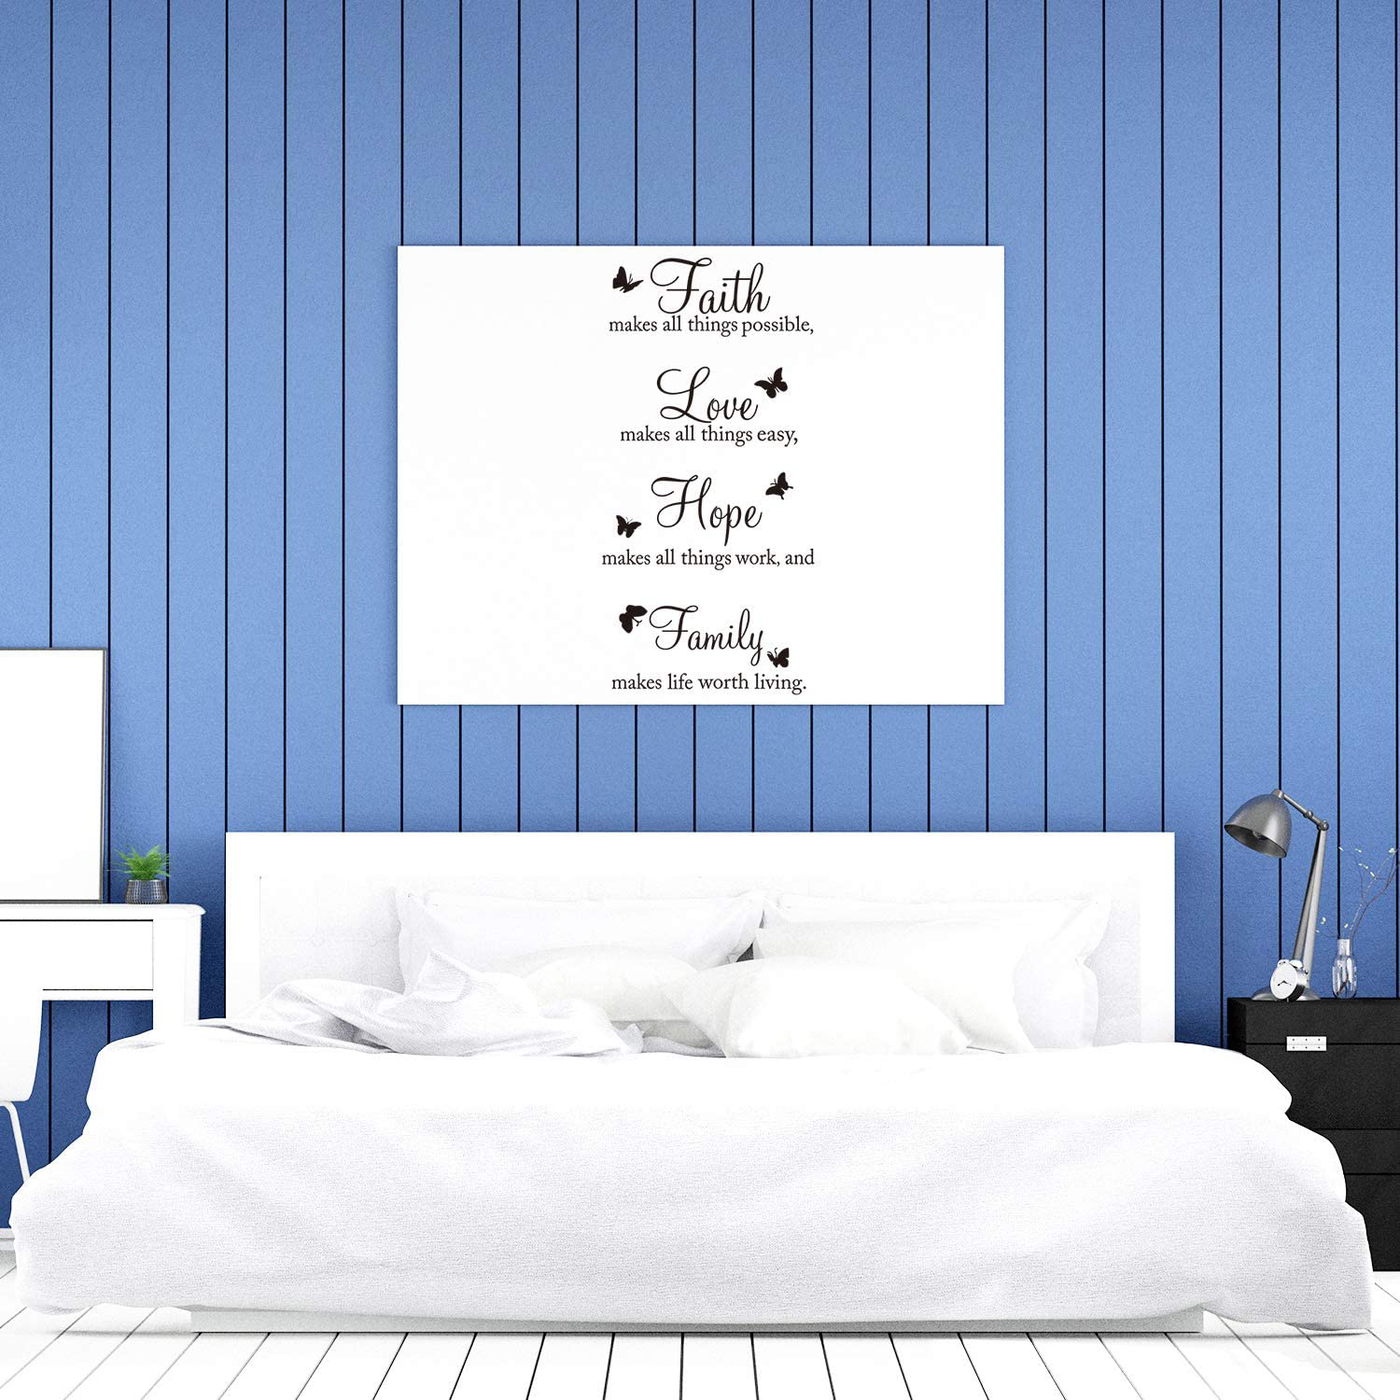 Zonon 4 Pieces Vinyl Wall Decals Faith Makes All Things Possible Live Every Moment Sticker Family Vinyl Wall Stickers Quotes Motivational Wall Quote Sayings Butterfly Wall Stickers Home Decors